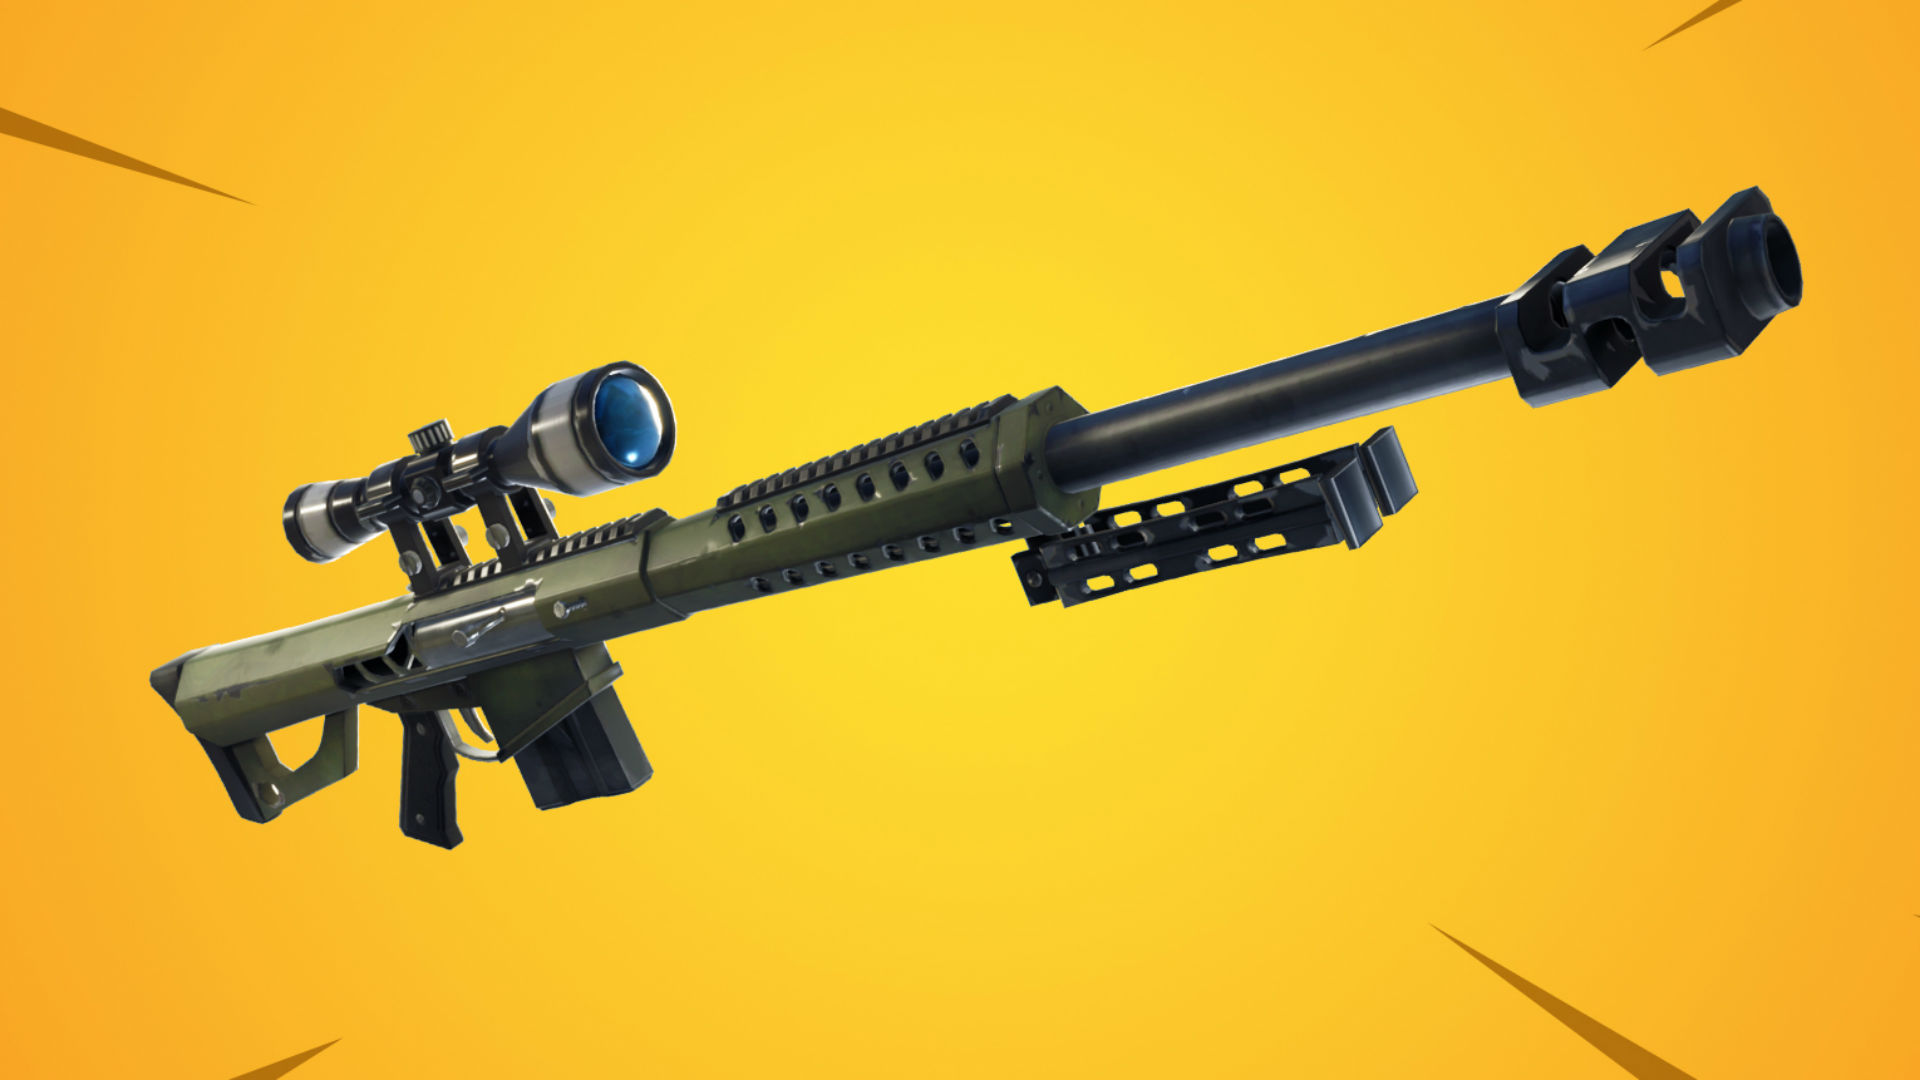 Fortnite 5.2 patch notes: Heavy Sniper Rifle, Soaring 50s ... - 1920 x 1080 jpeg 129kB